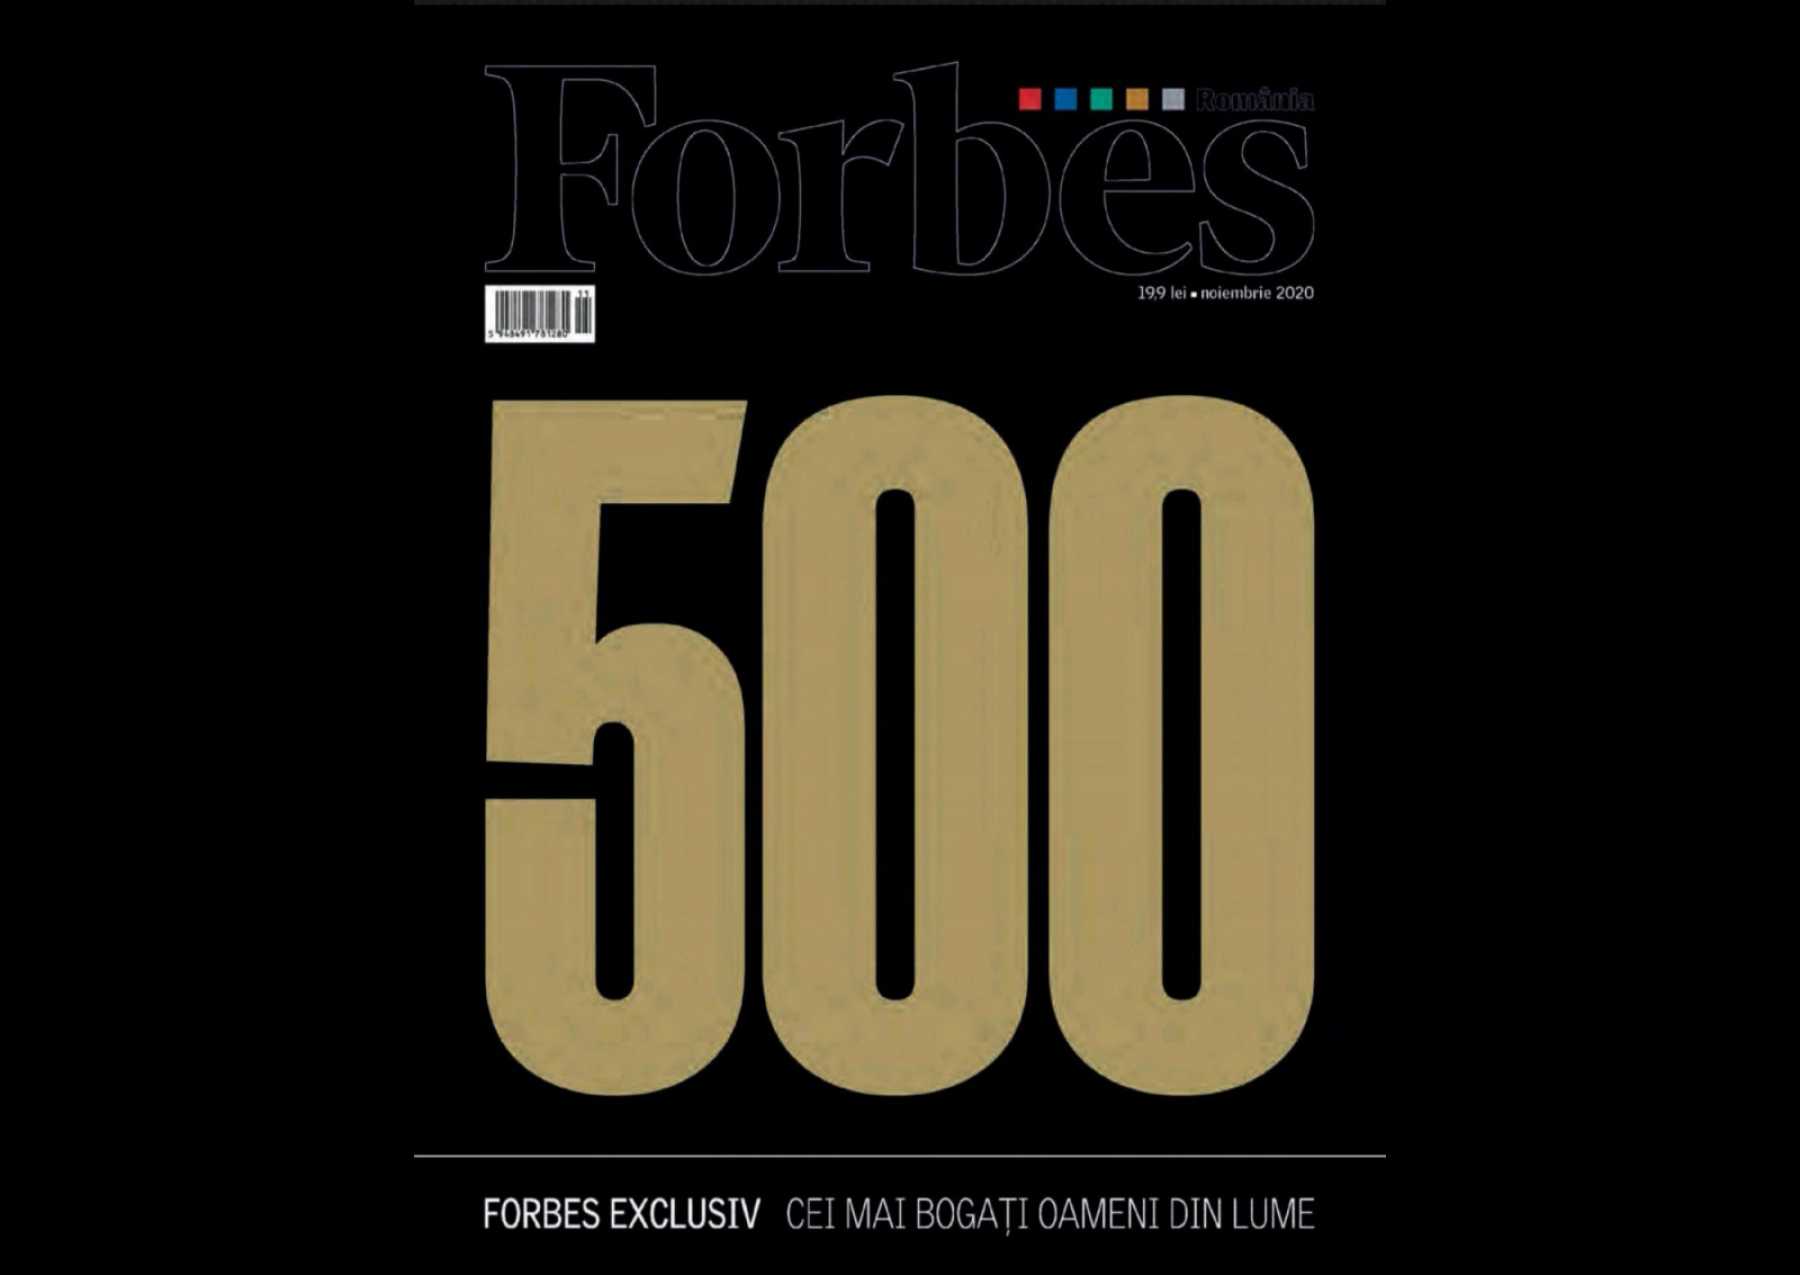 Top residential office real estate in Forbes Top 500